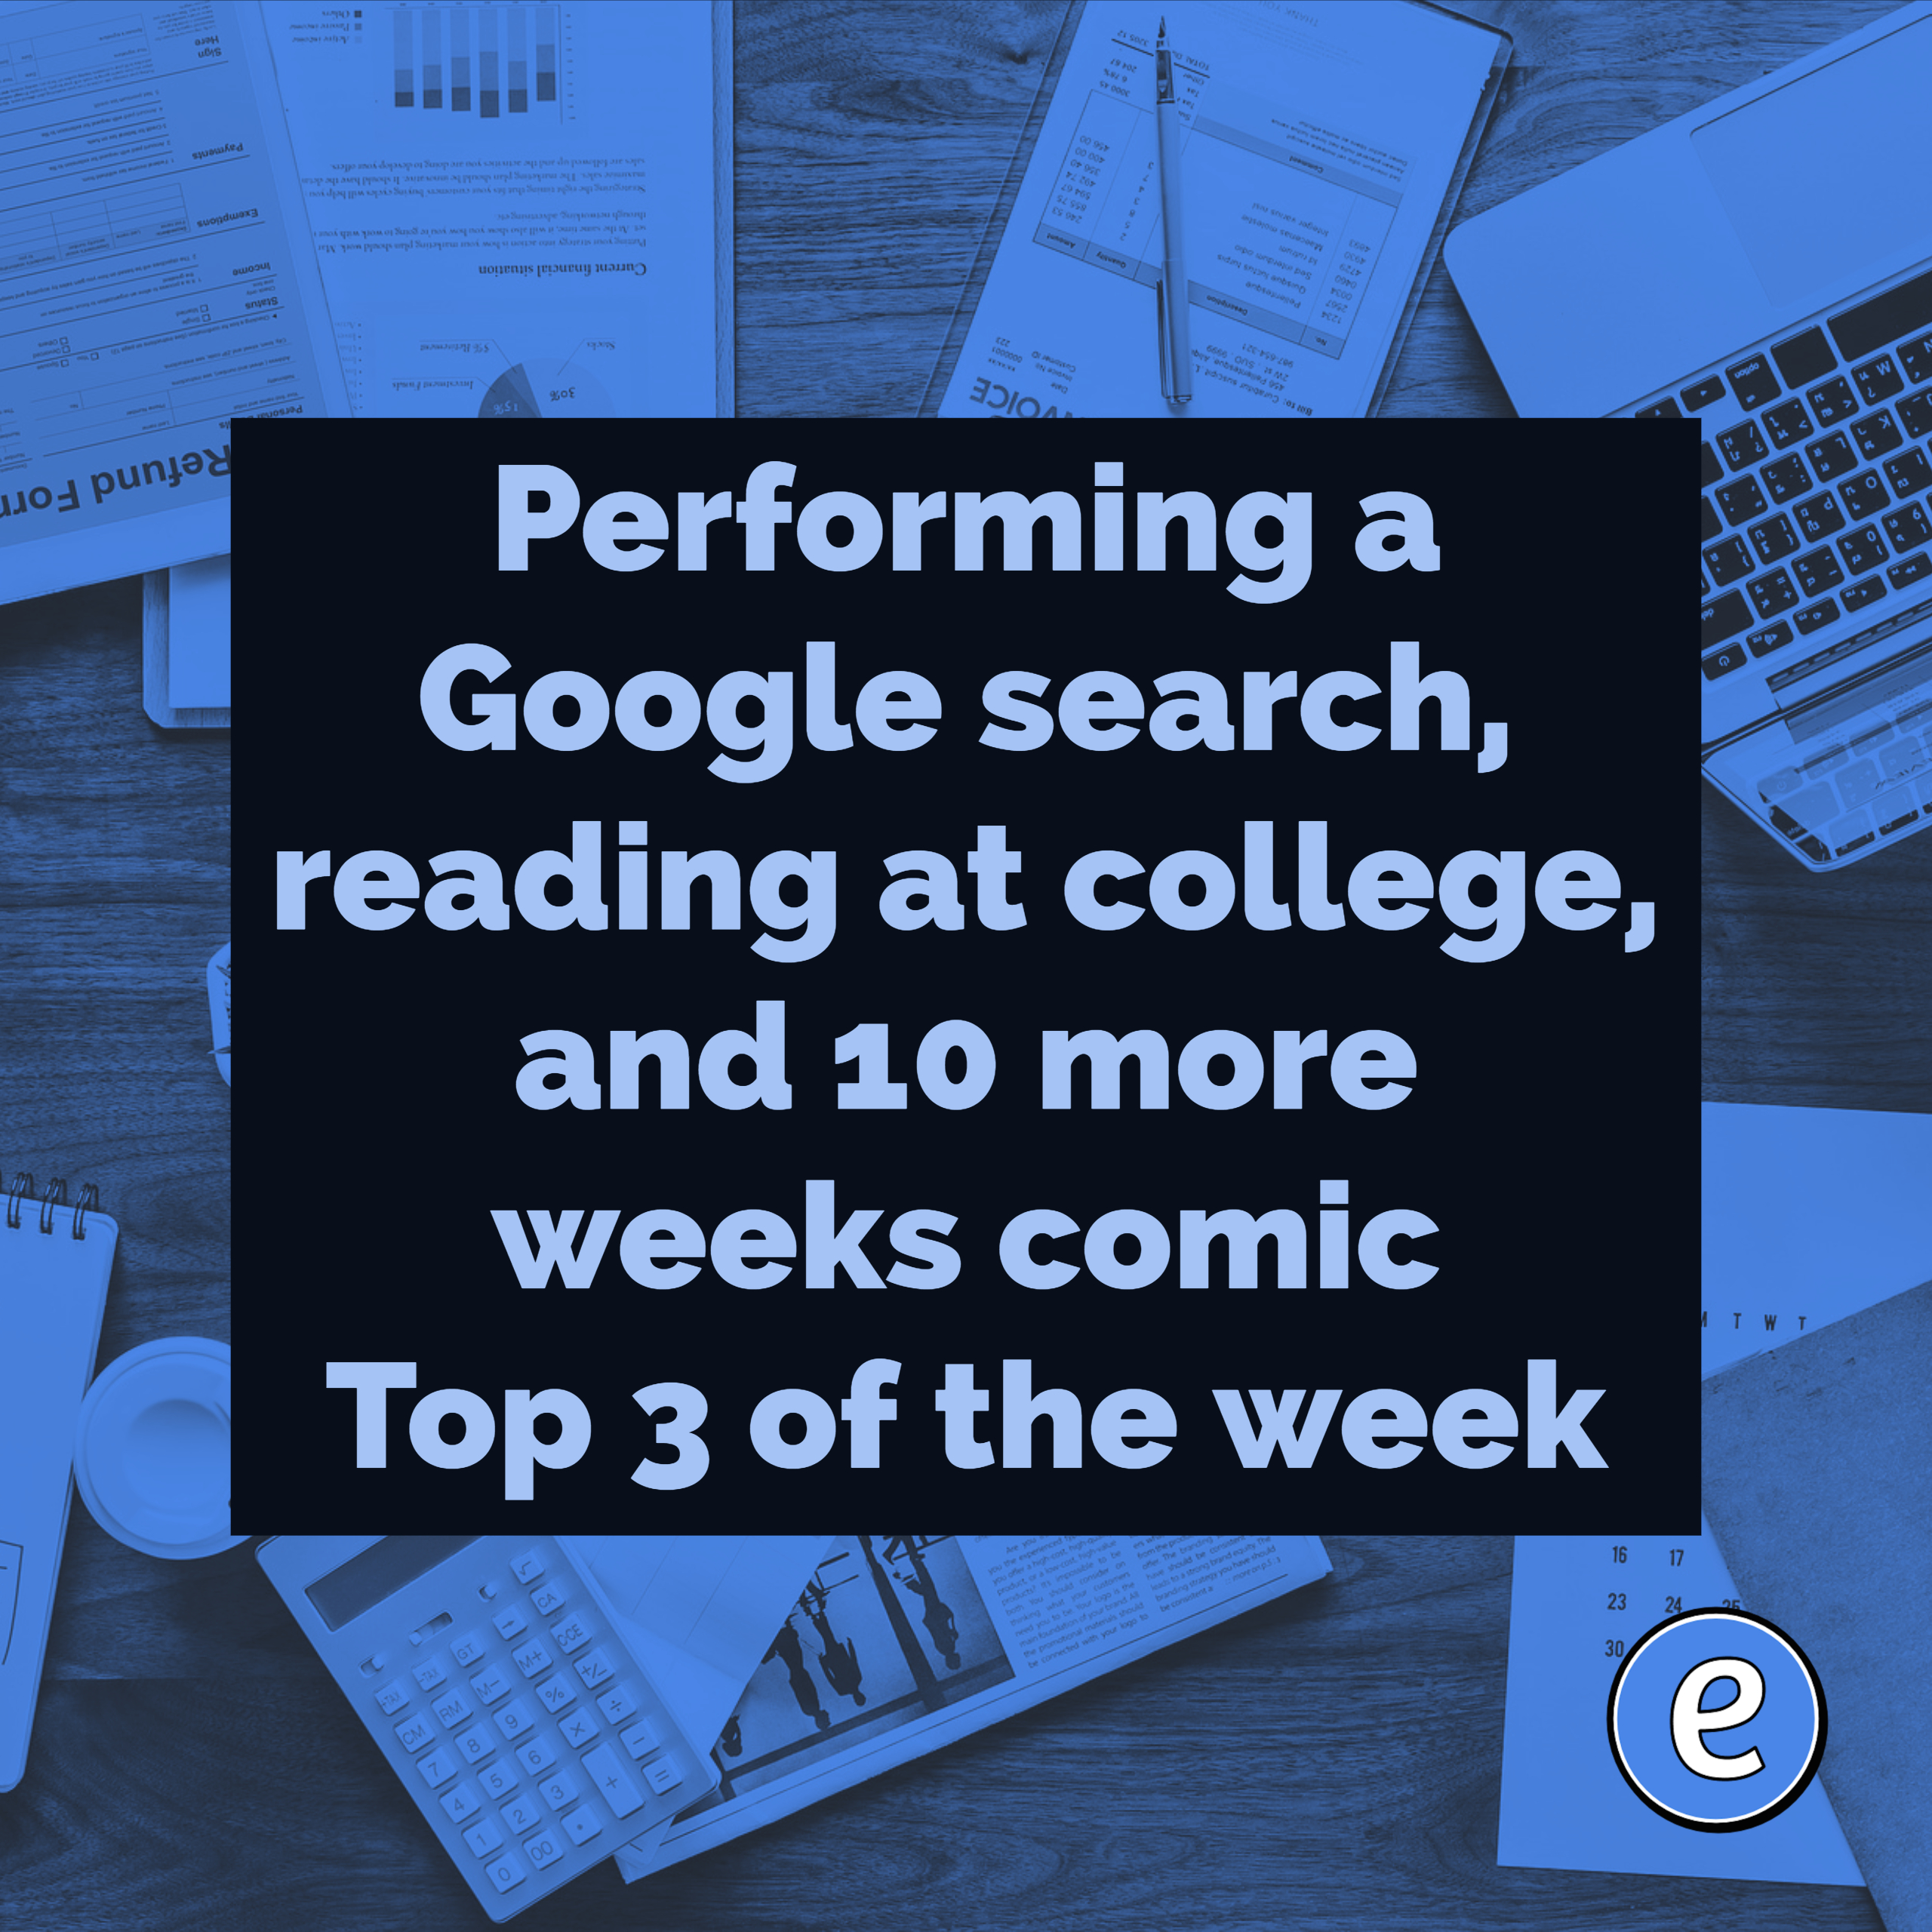 Performing a Google search, reading at college, and 10 more weeks comic – Top 3 of the week